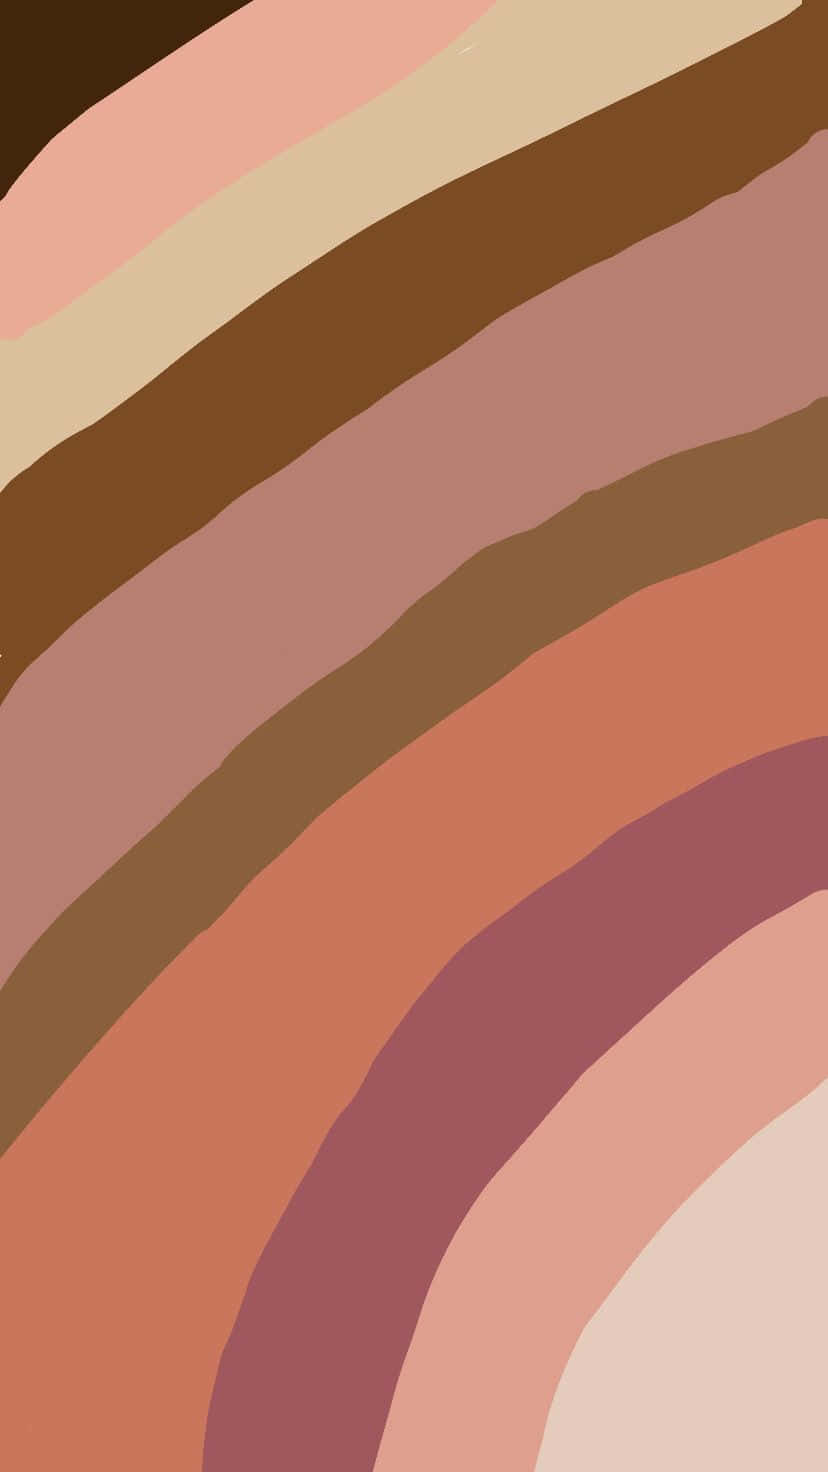 A Pink, Brown, And Beige Abstract Background